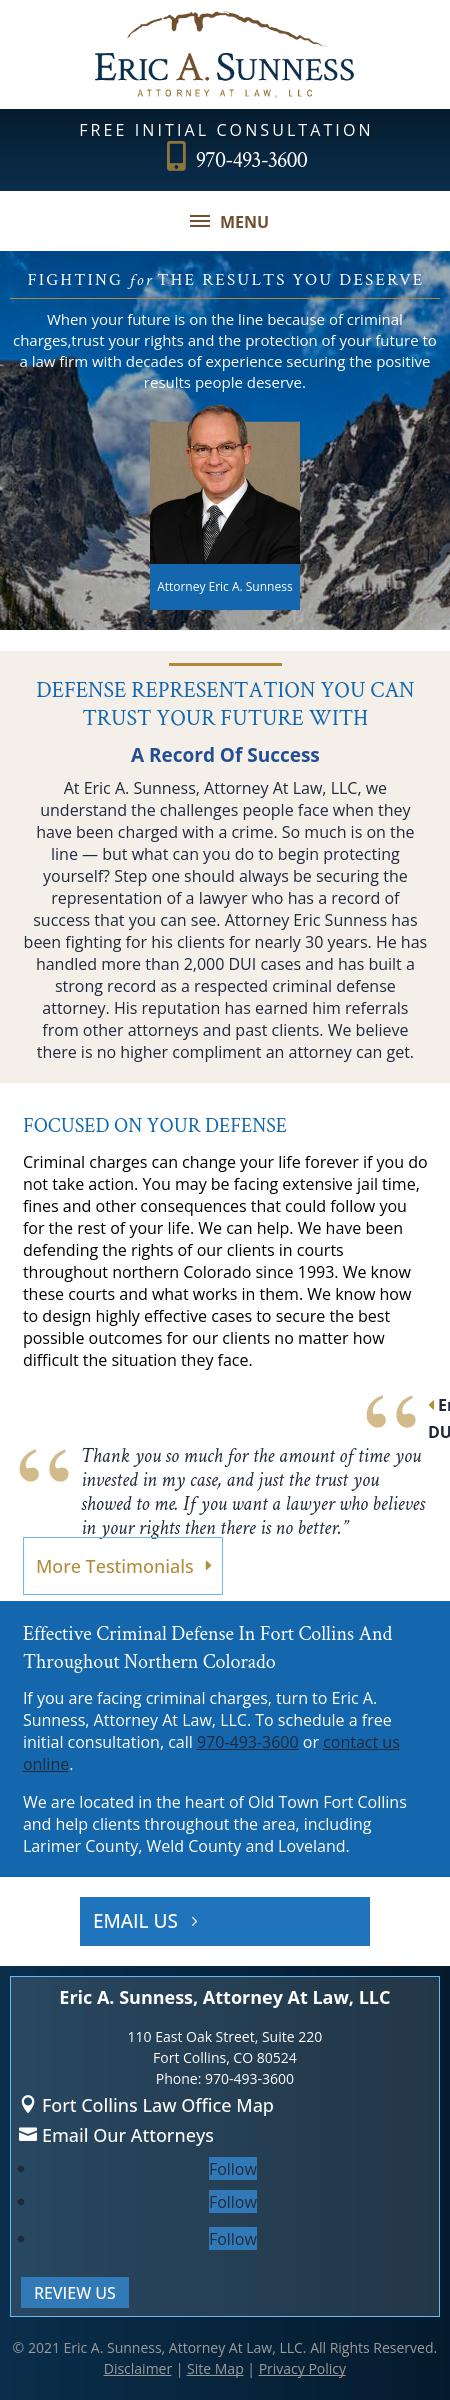 Eric A. Sunness, Attorney at Law, LLC - Fort Collins CO Lawyers